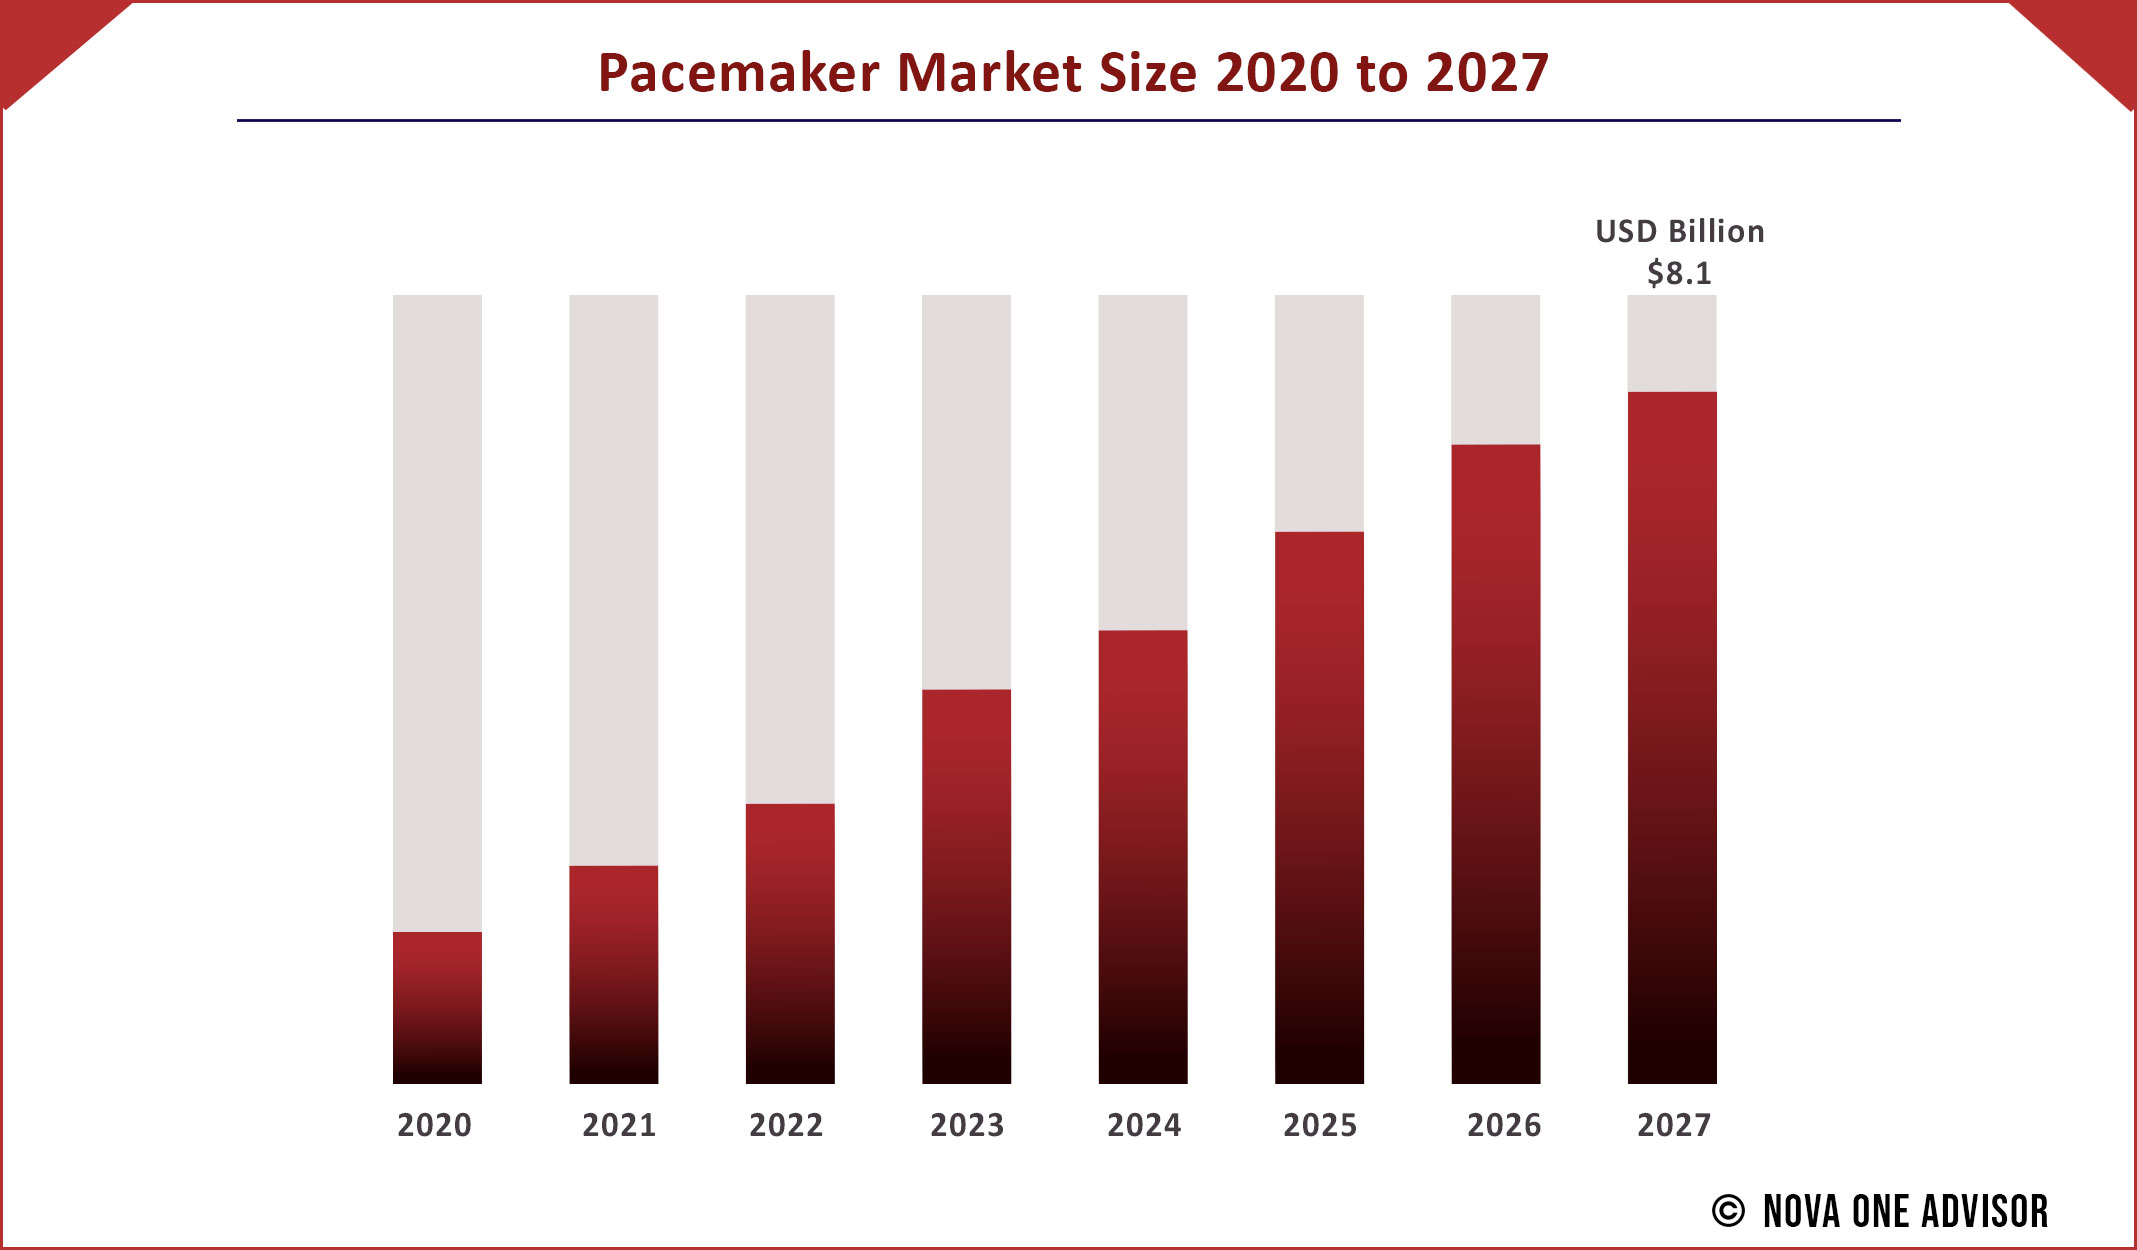 Pacemaker Market Size 2020 to 2027